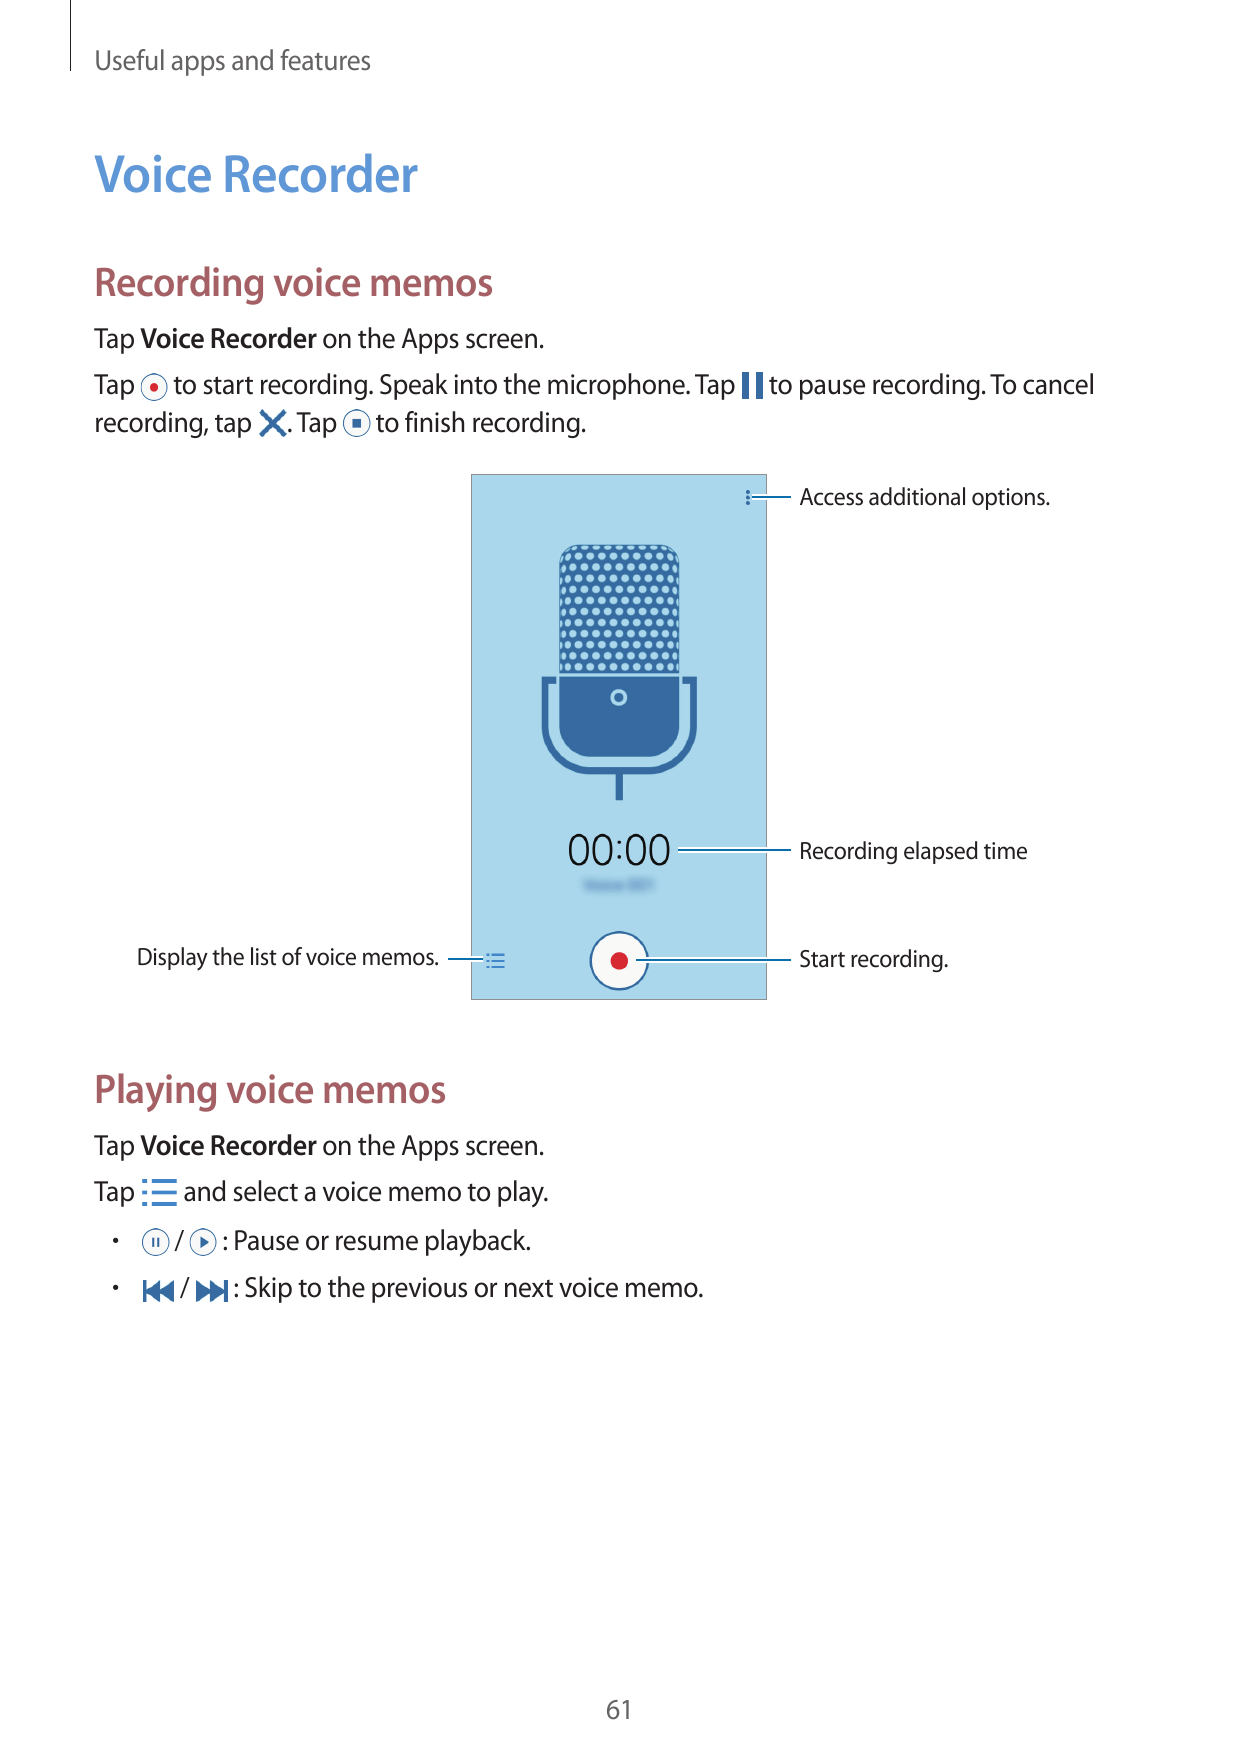 Useful apps and featuresVoice RecorderRecording voice memosTap Voice Recorder on the Apps screen.Tap to start recording. Speak i